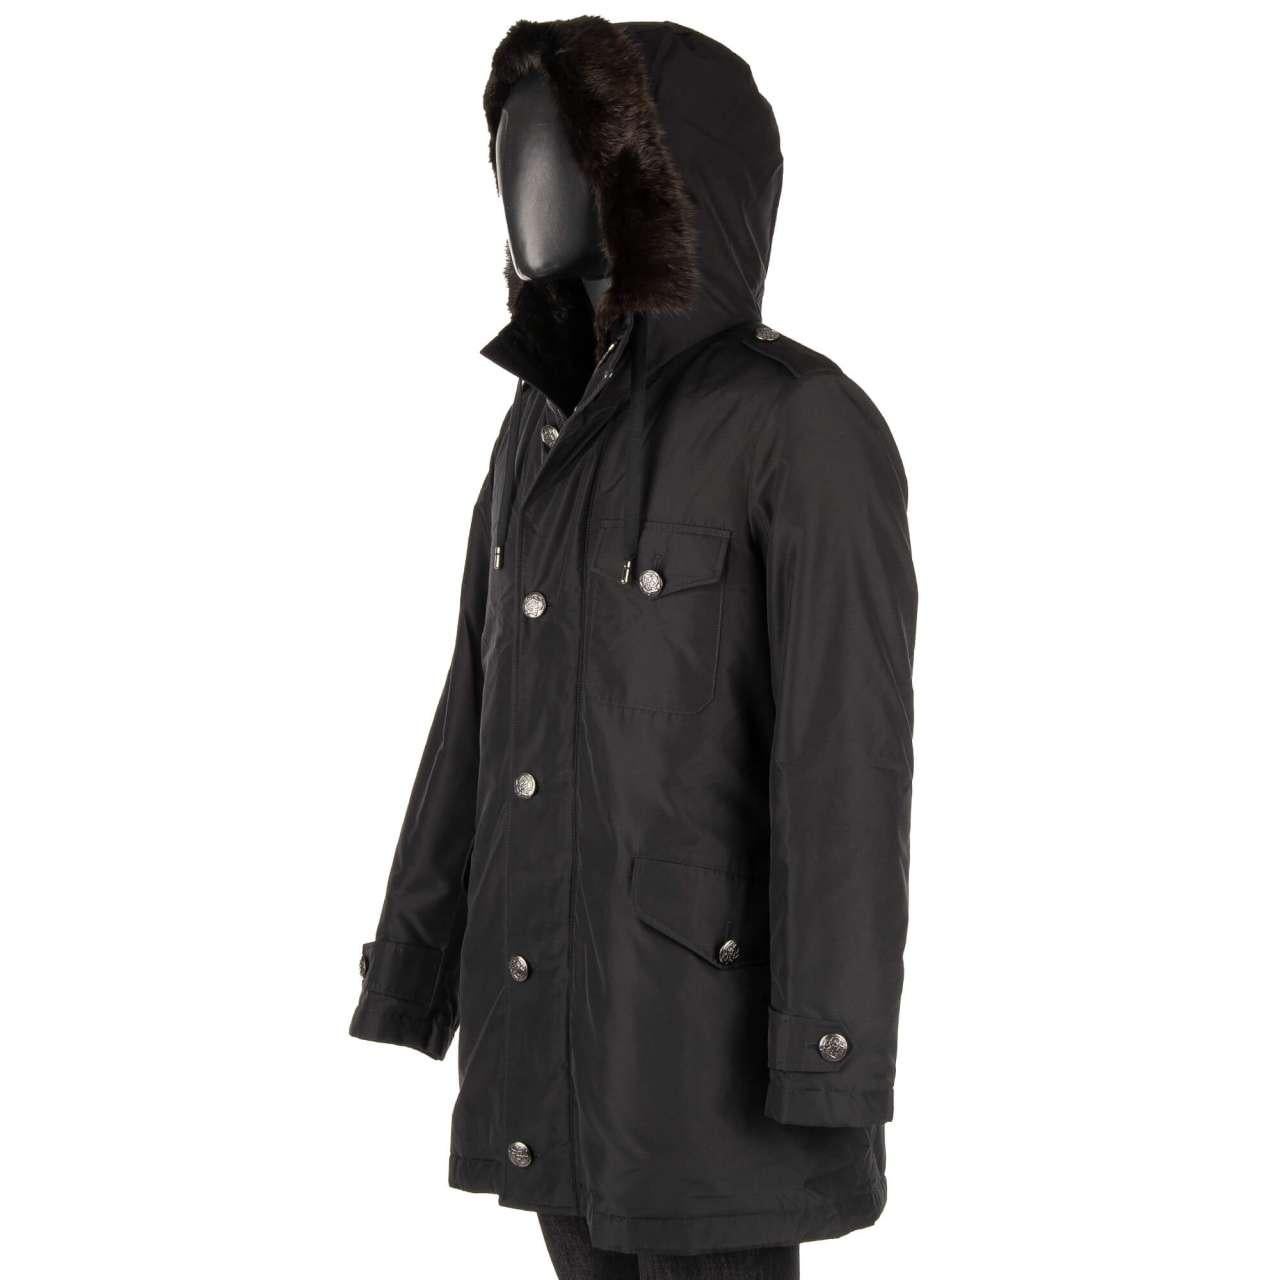 Dolce & Gabbana Silk Parka Jacket with Detachable Fur Lining and Hoody Black 56 For Sale 3